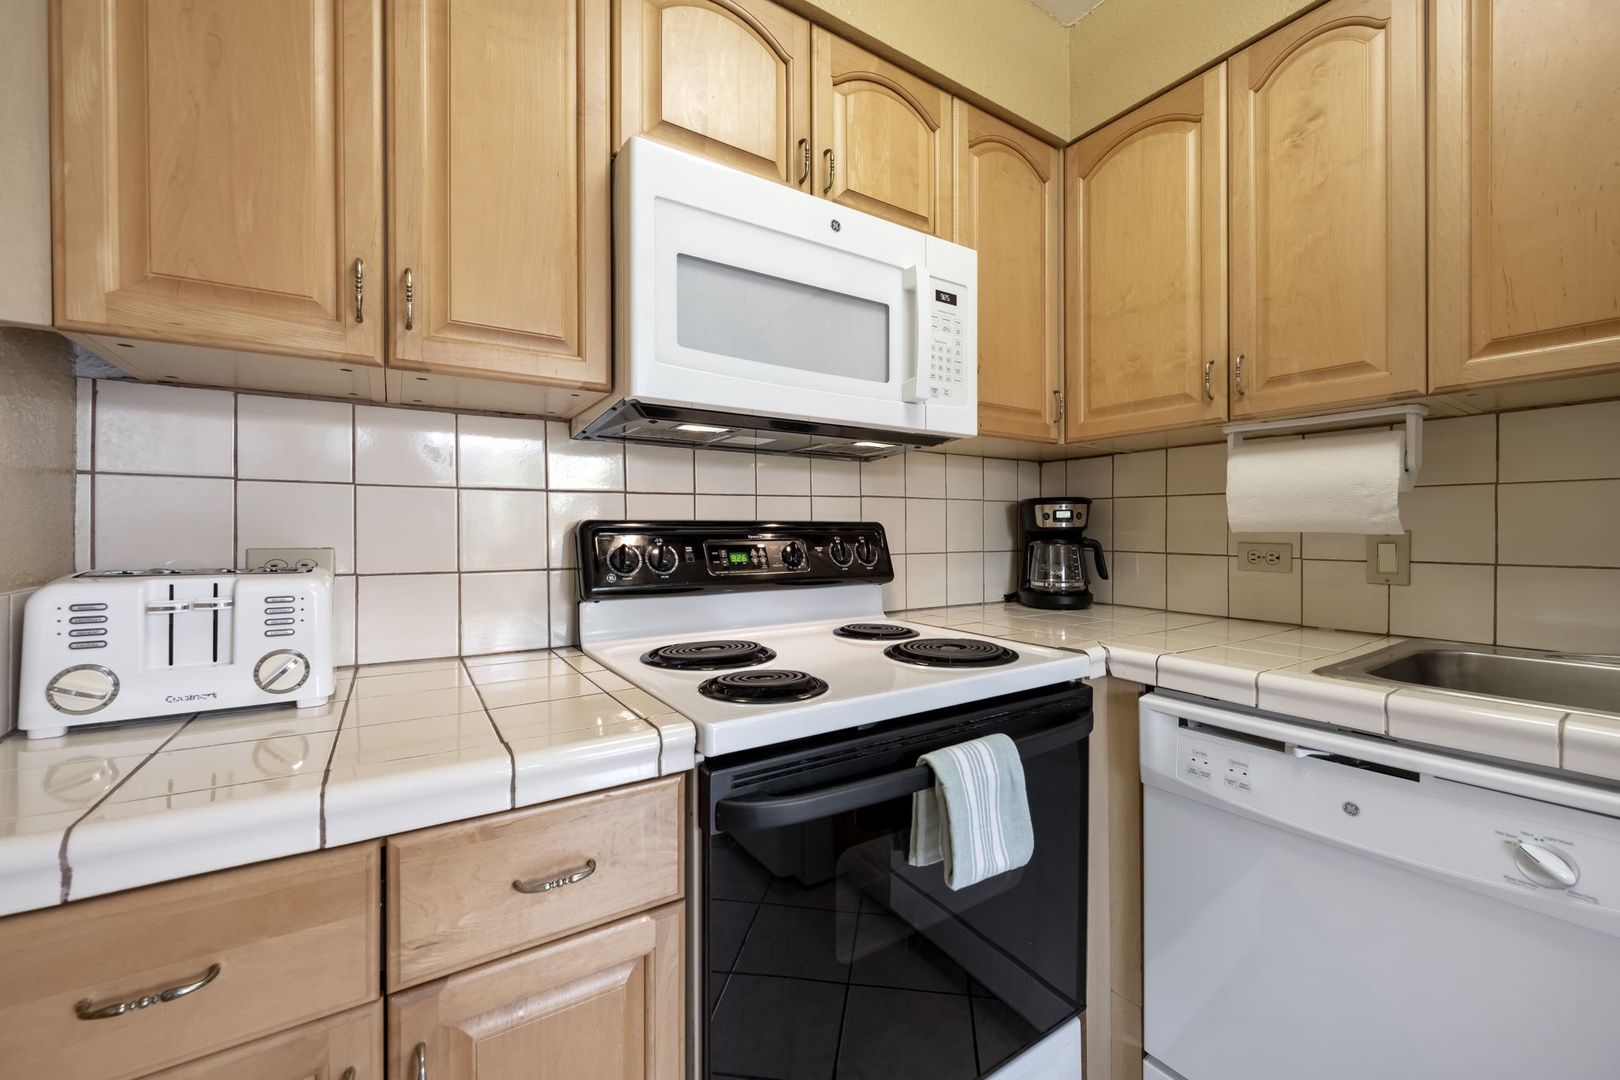 Equipped kitchen with coffeemaker, toaster, electric stove and more!